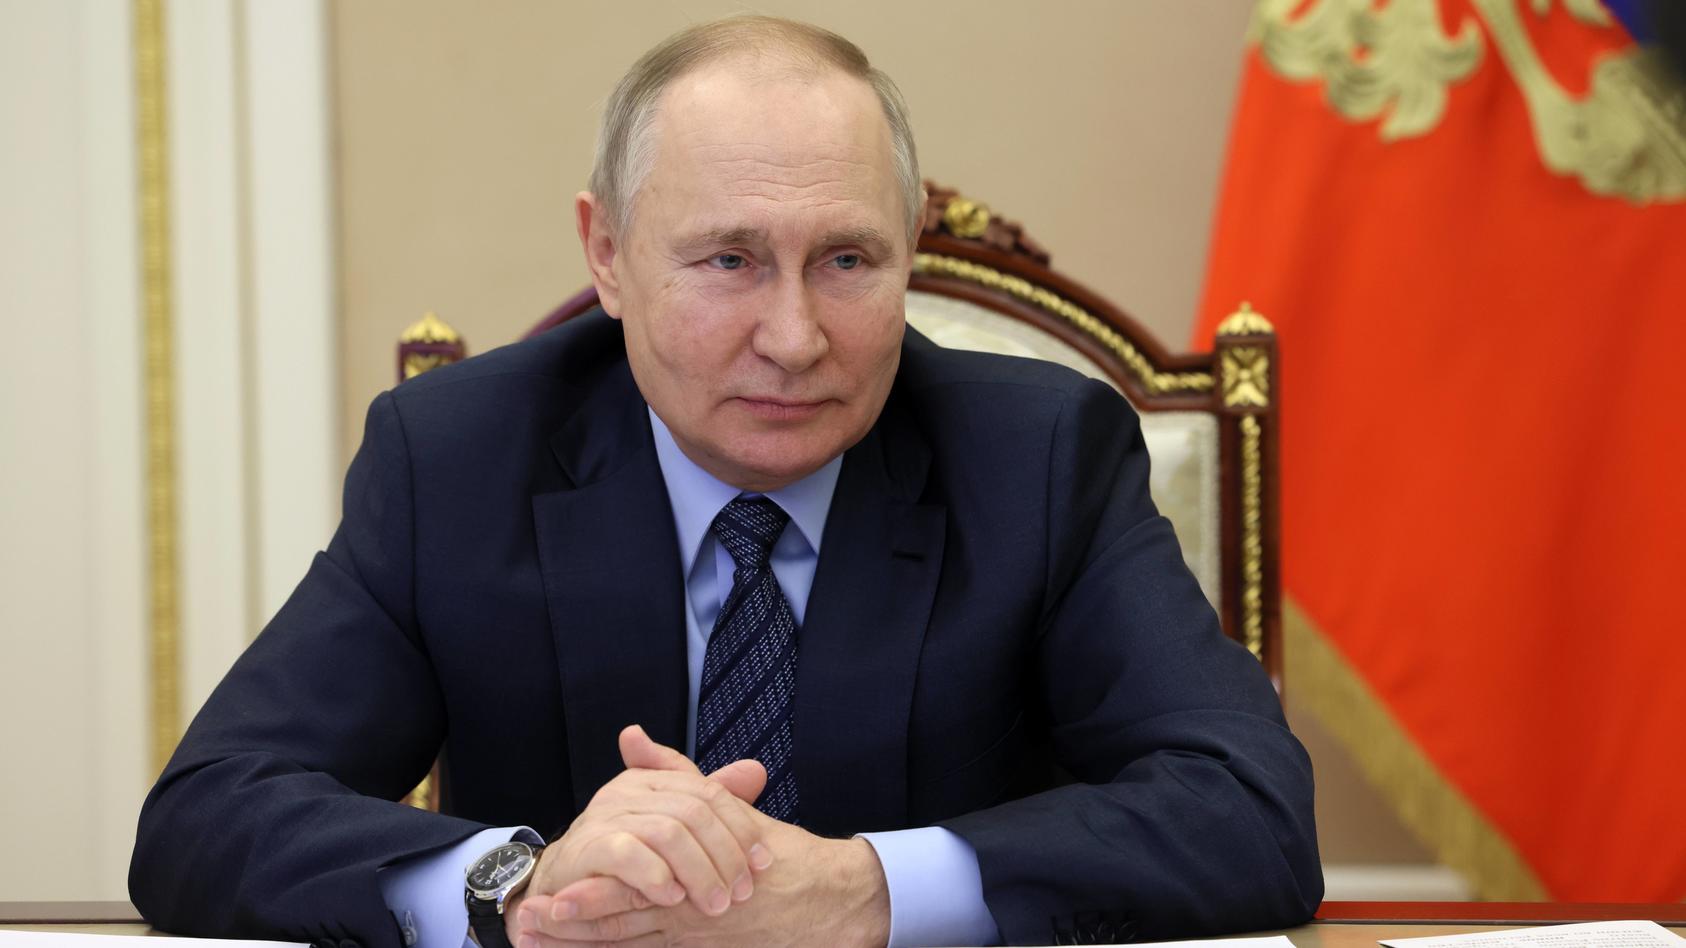  Russia Putin Social Facilities Opening 8327001 30.11.2022 Russian President Vladimir Putin attends an opening of social facilities in various regions that were built or overhauled as part of federal and regional development programmes, via a video c